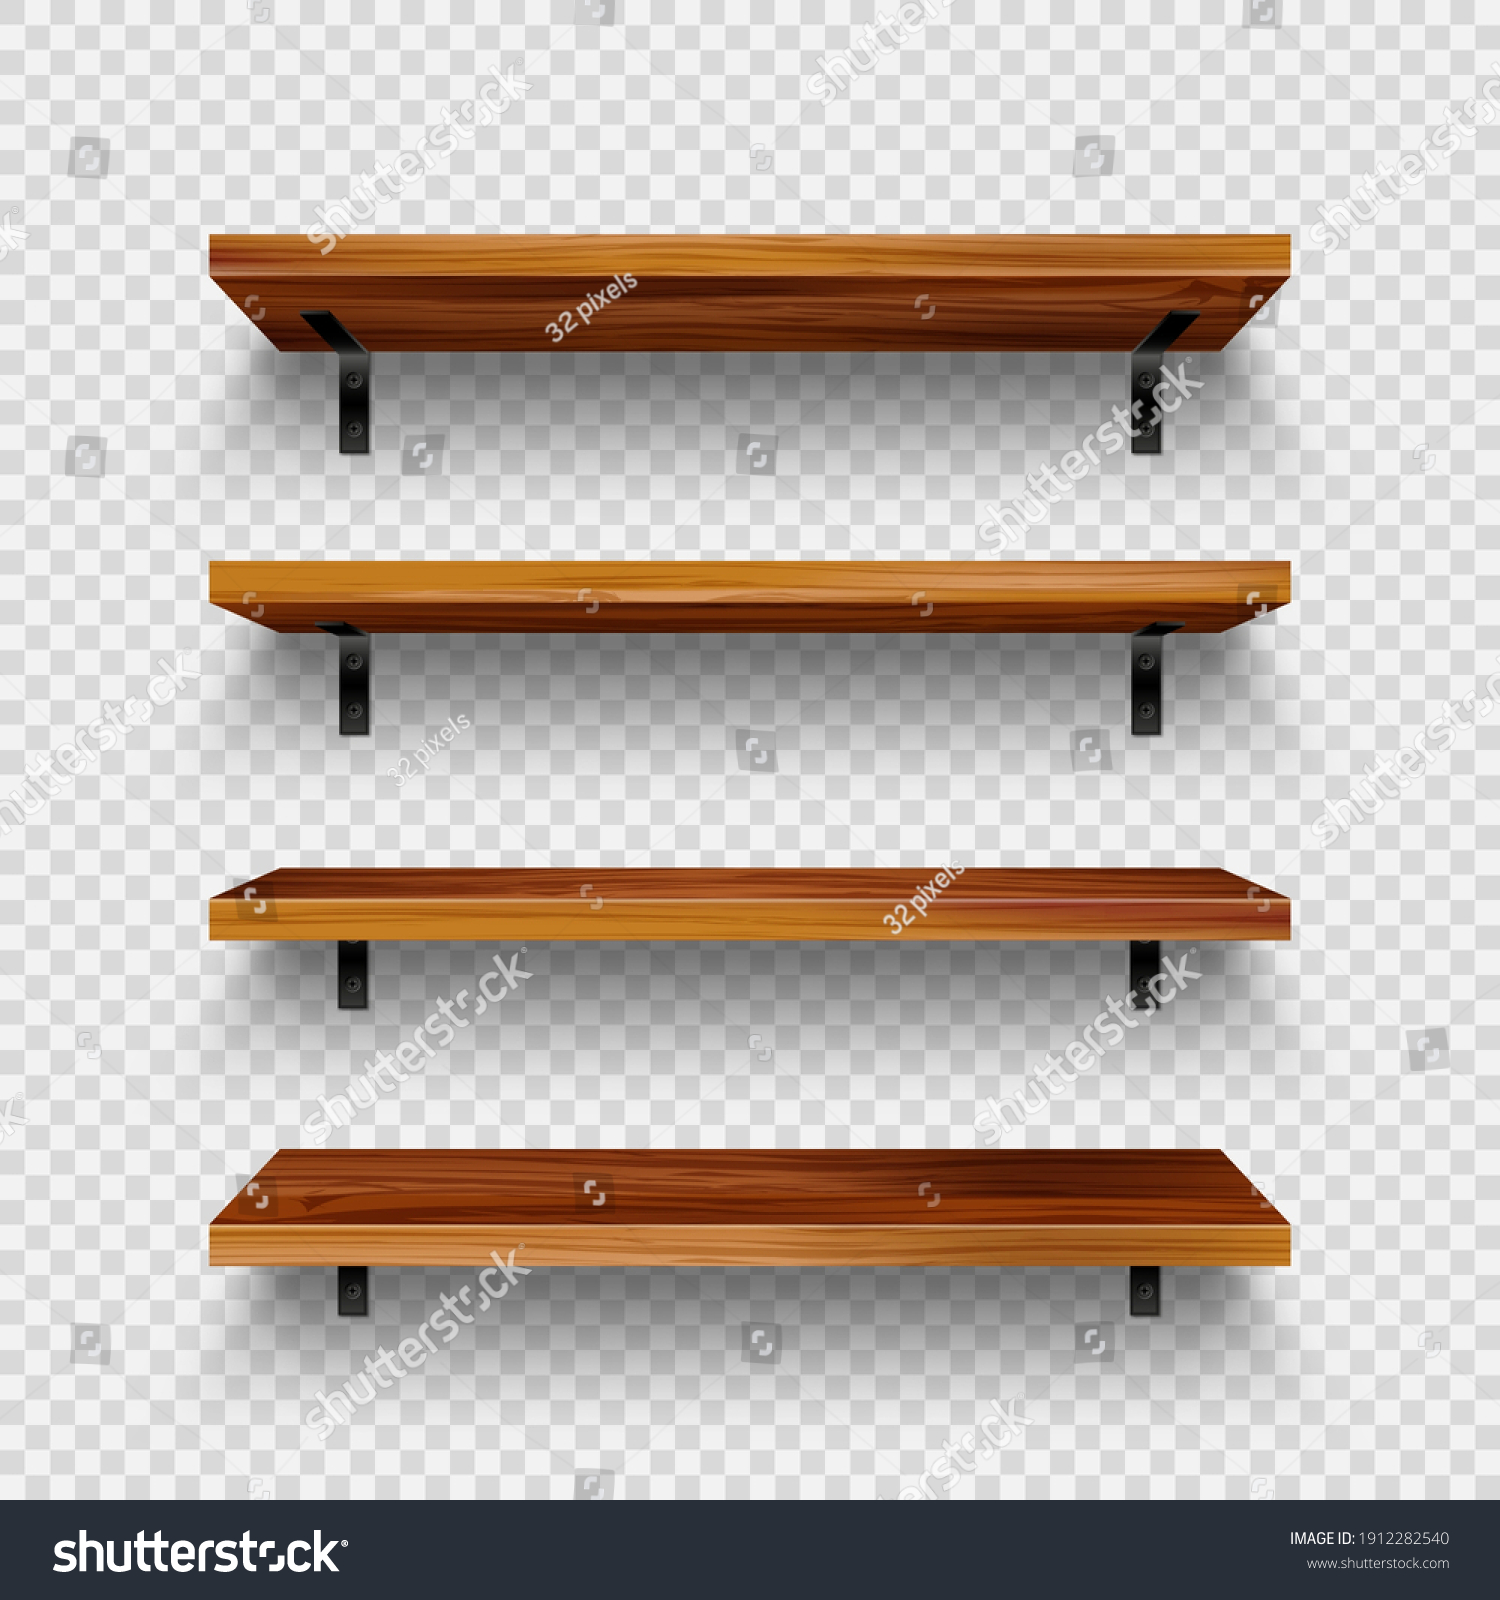 Realistic empty wooden store shelves set. Product shelf with wood texture and black wall mount. Grocery rack. Vector illustration. #1912282540